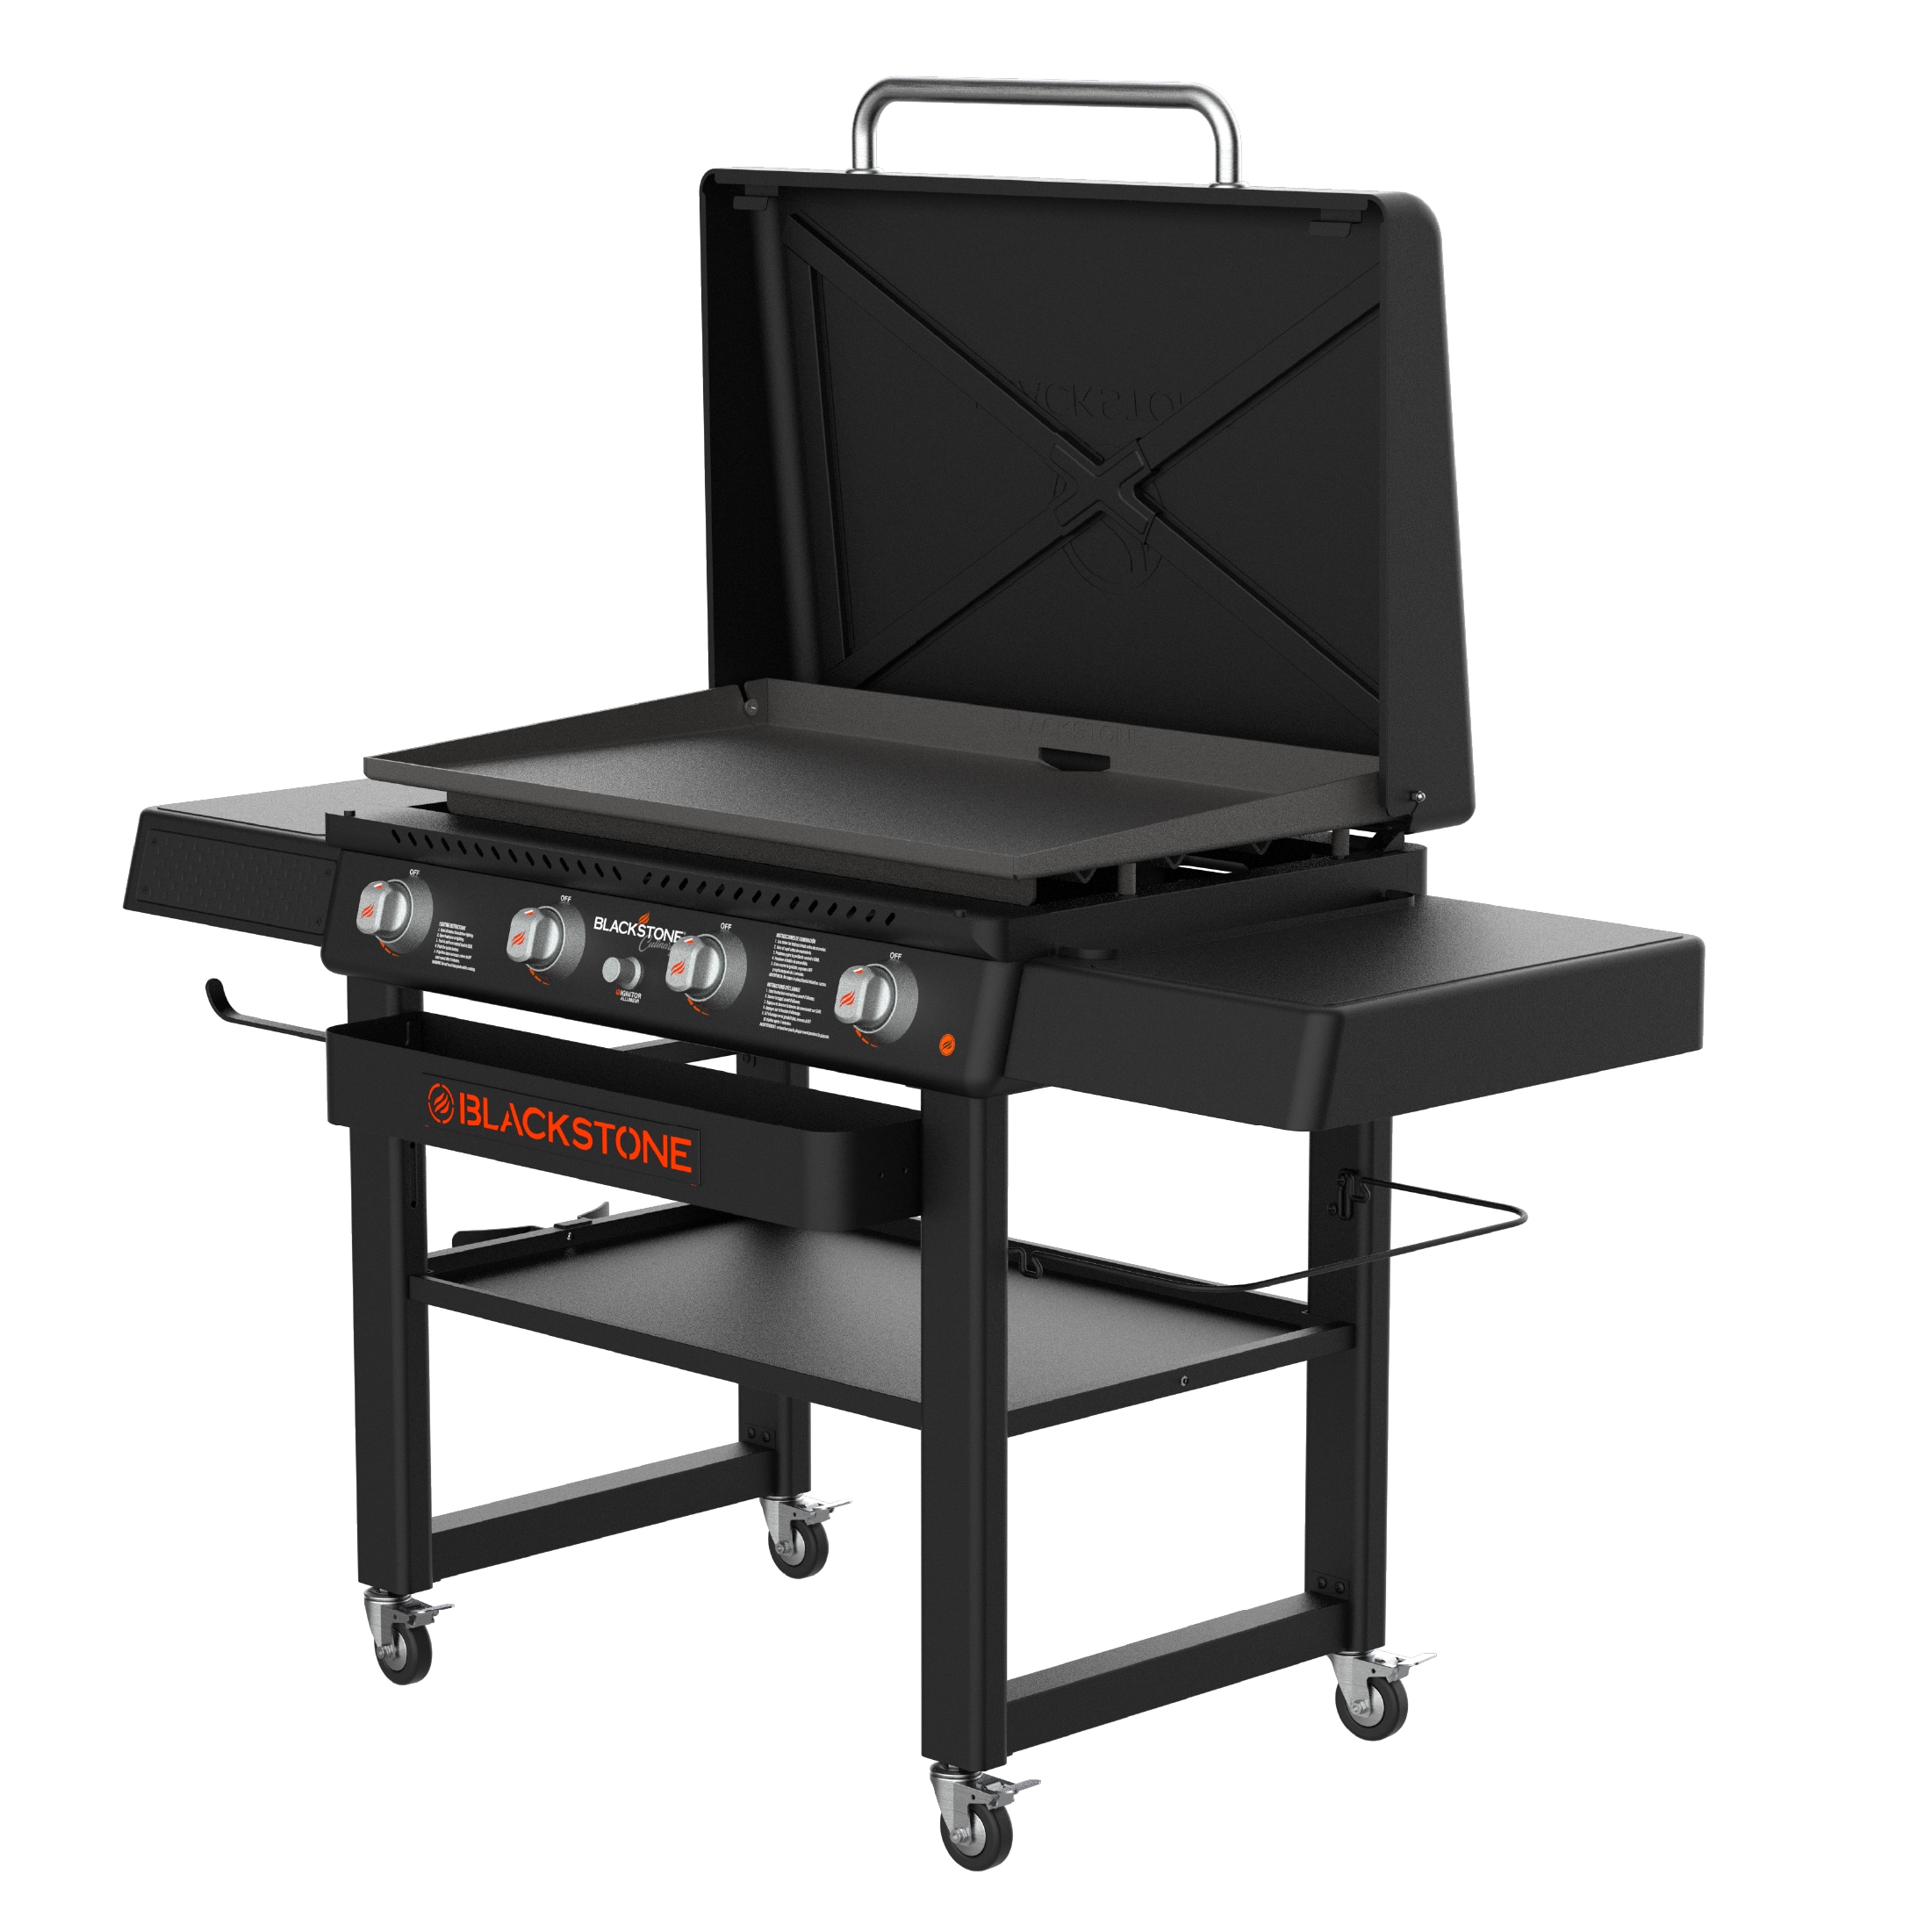 Outdoor Grill  Get to Know the Ninja Woodfire™ Outdoor Grill 